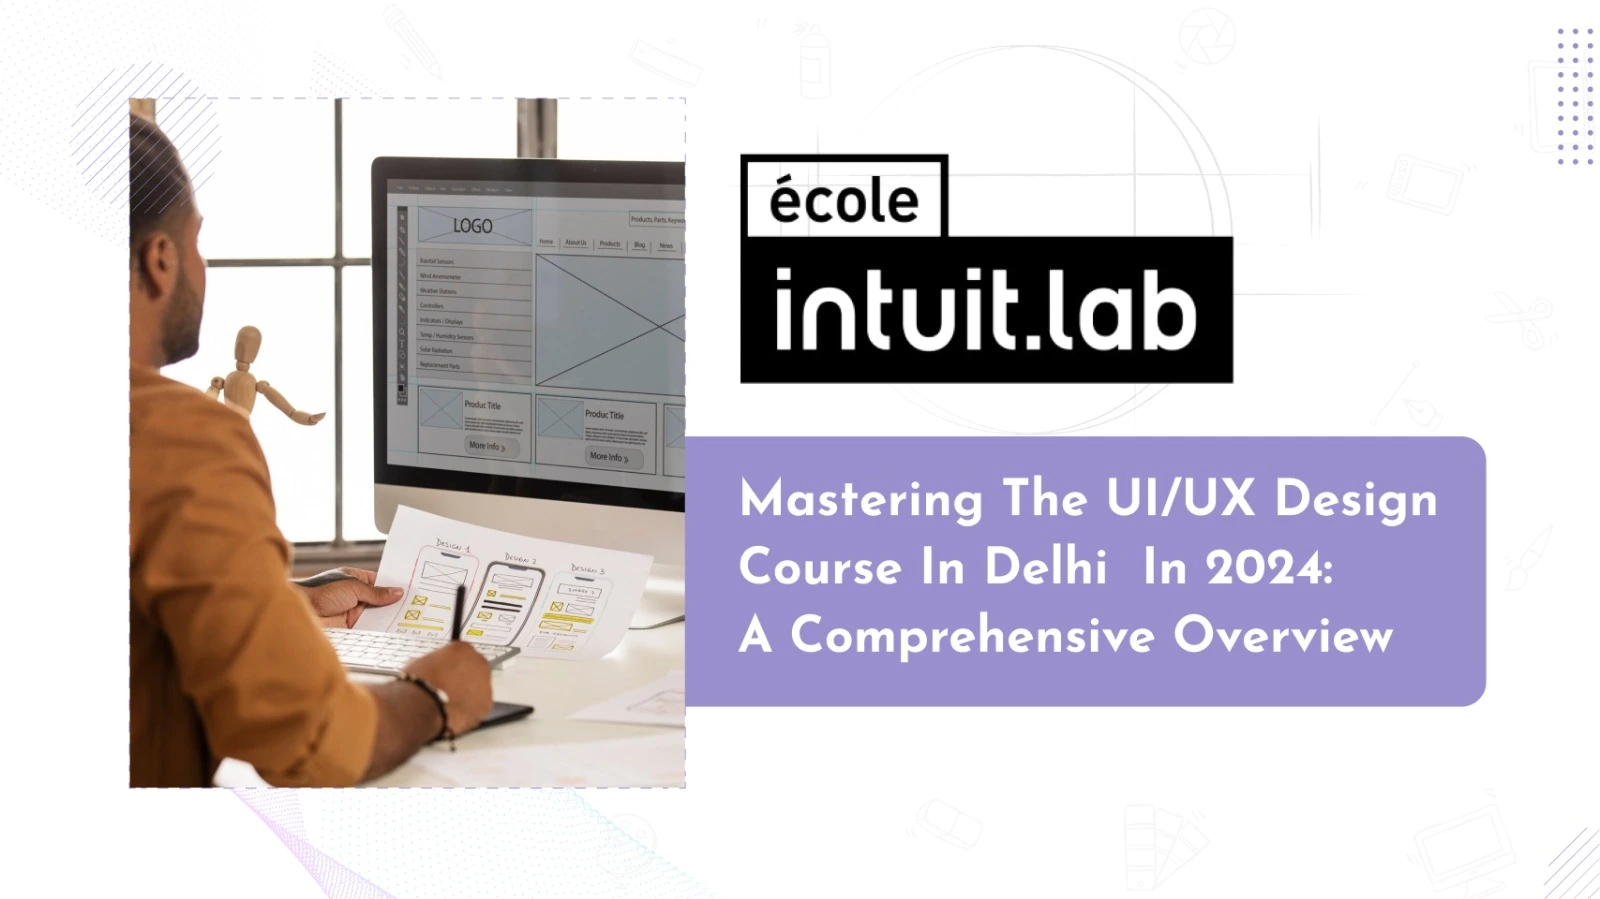 Mastering The UI/UX Design Course in Delhi in 2024: A Comprehensive Overview